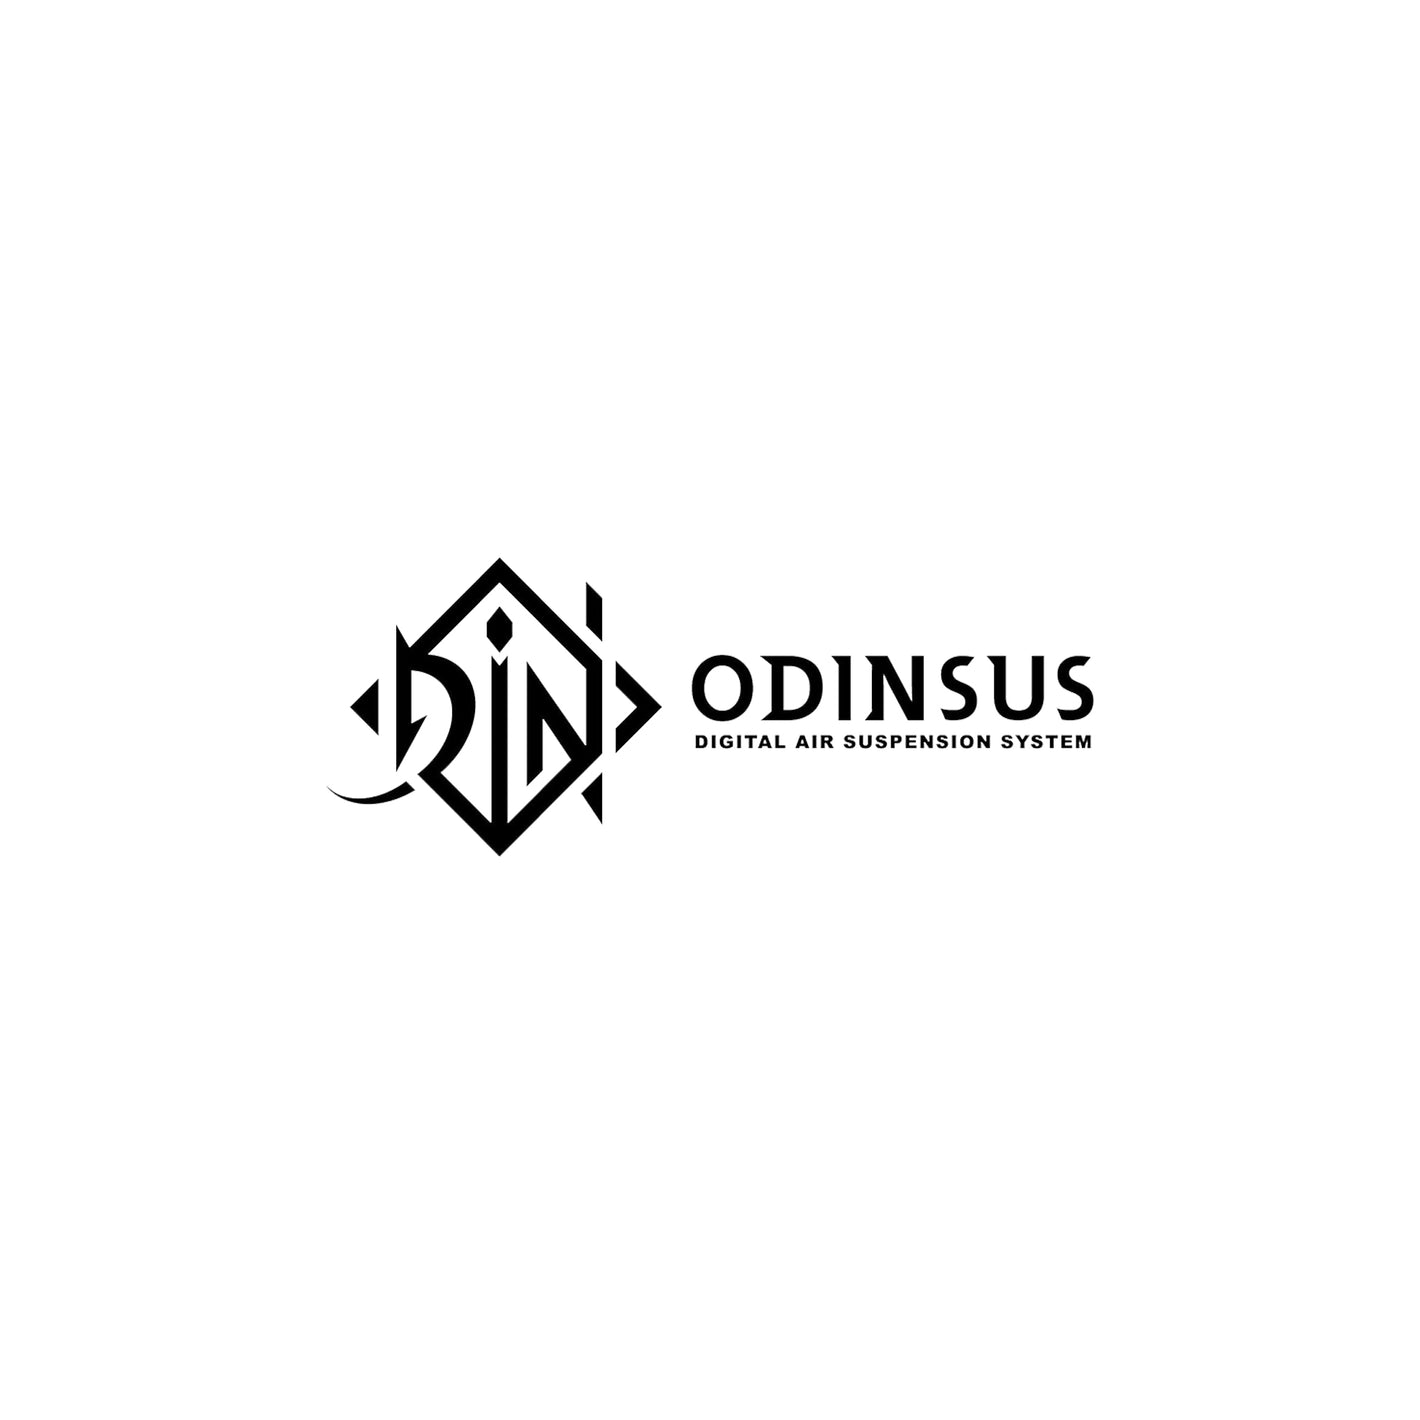 All ODIN SUS Products